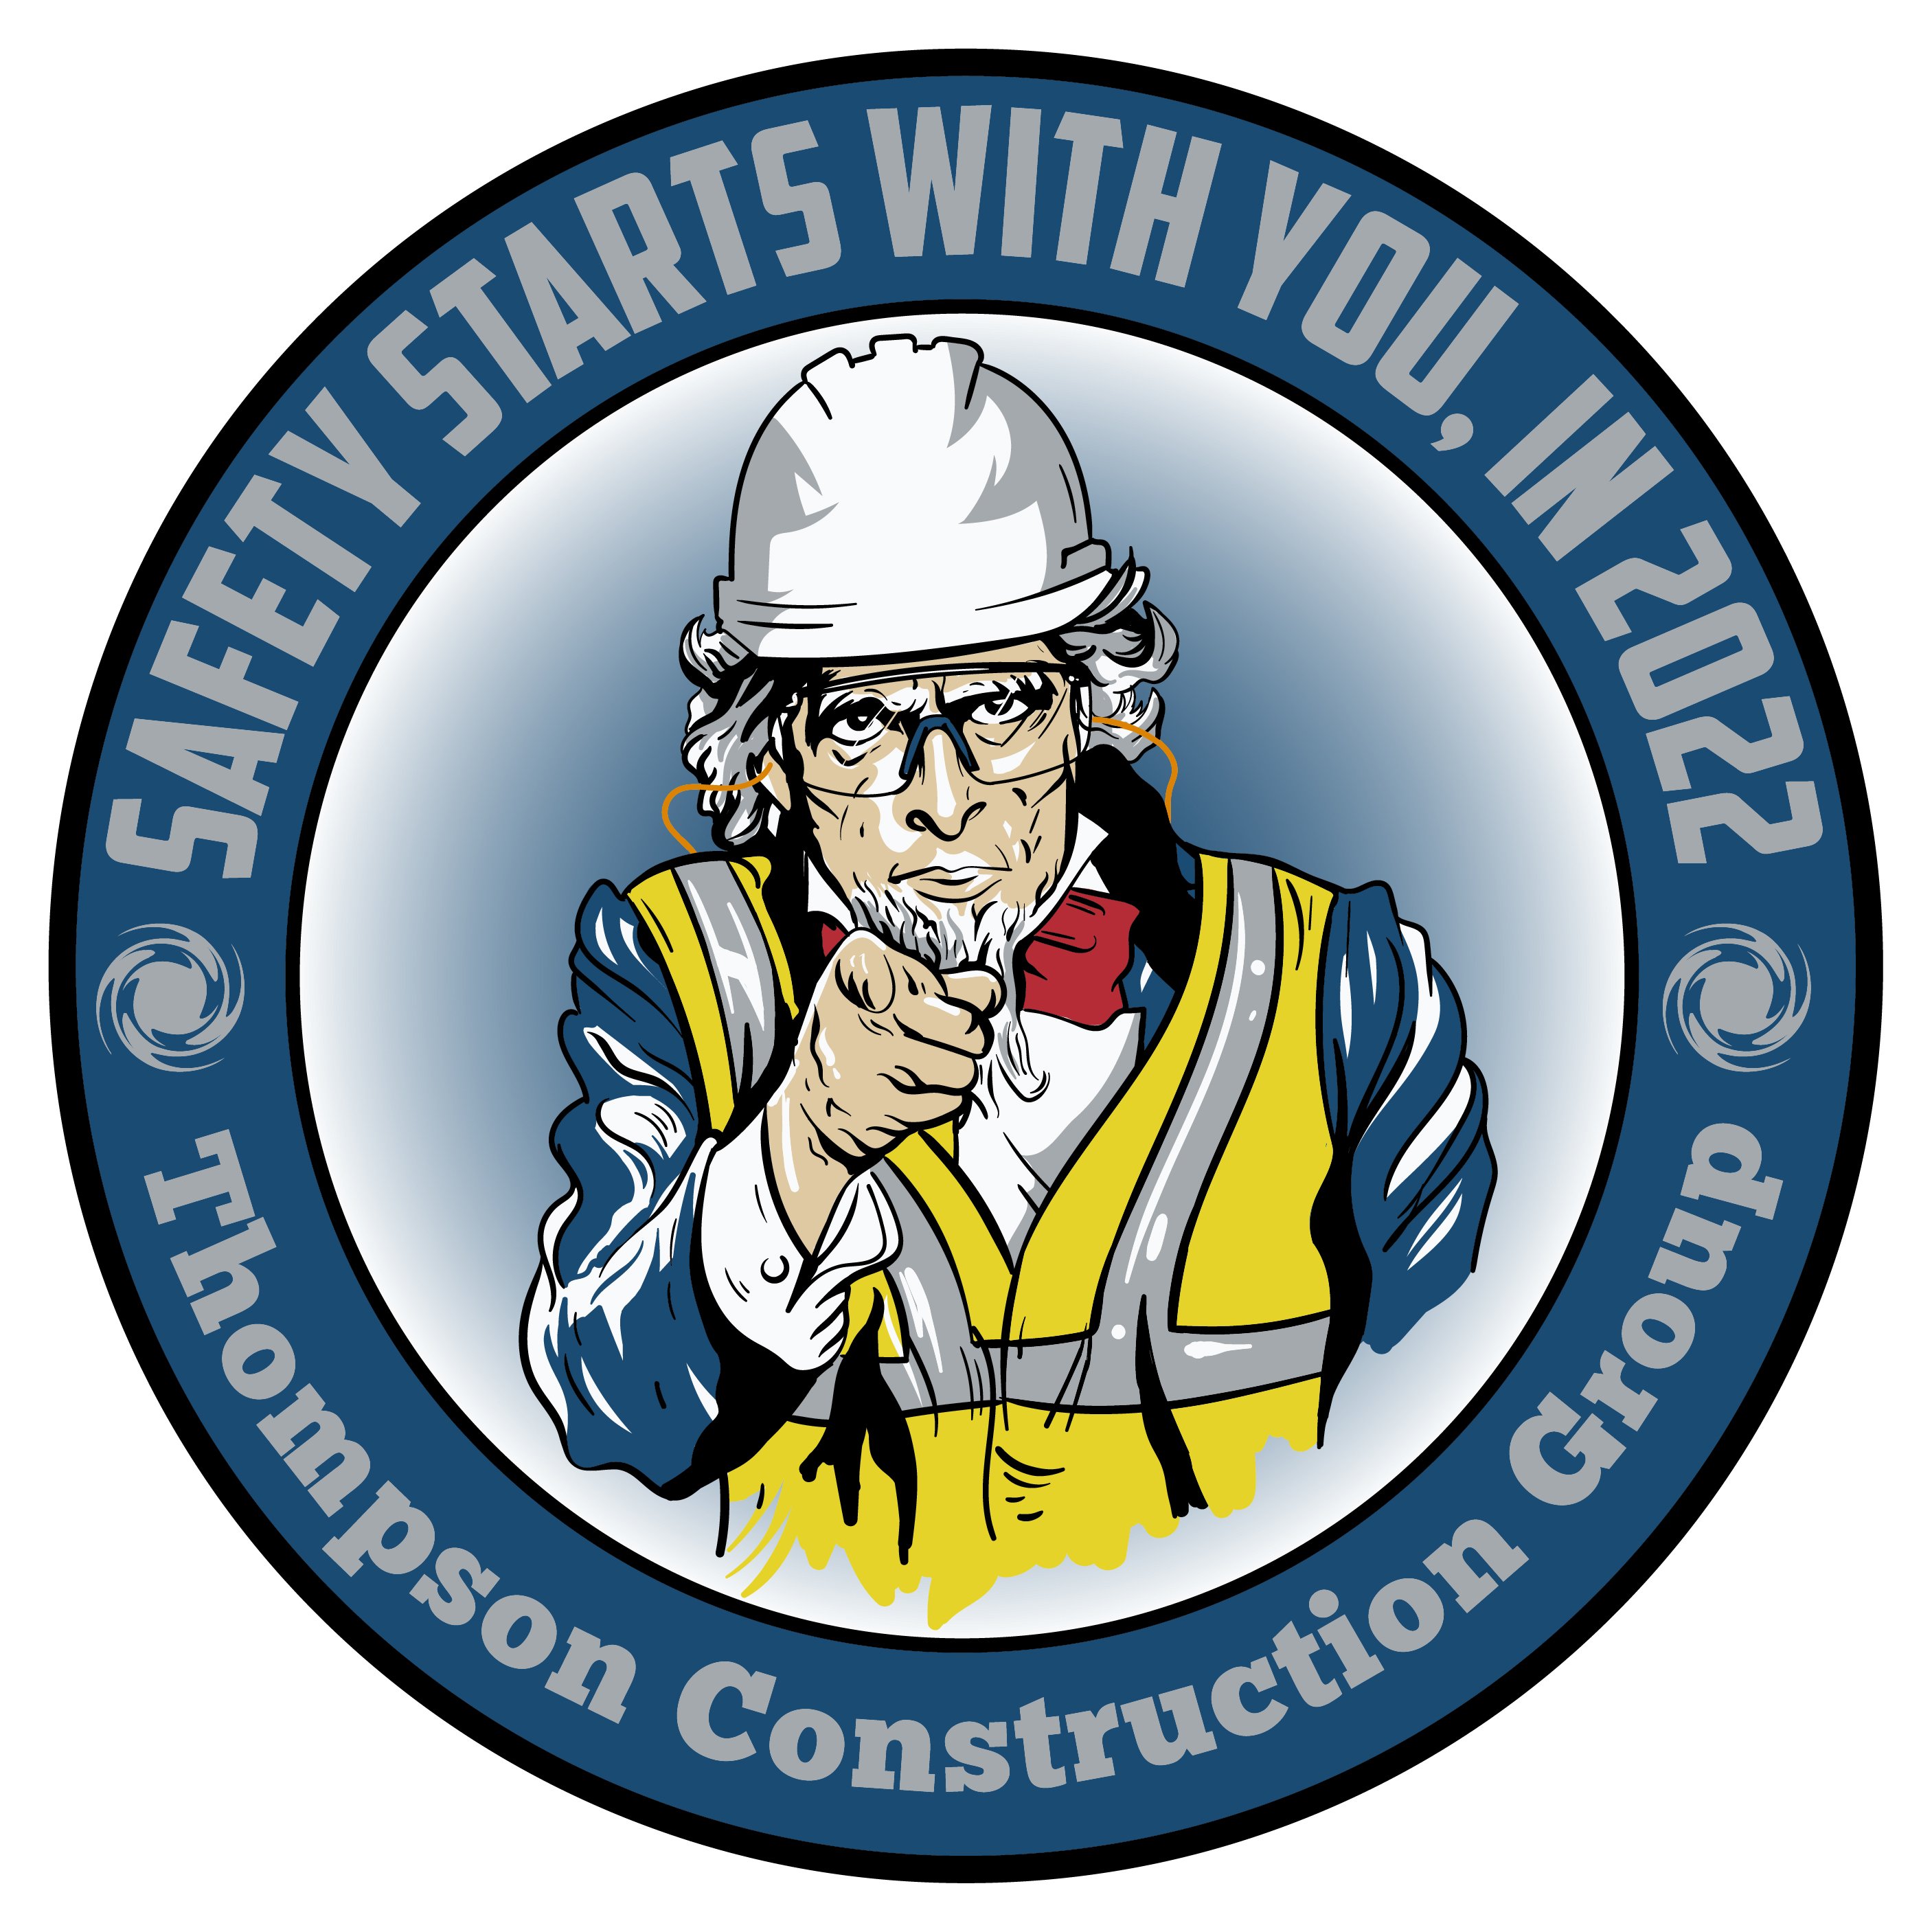 ­­­­Thompson announces tenth annual safety slogan contest winners